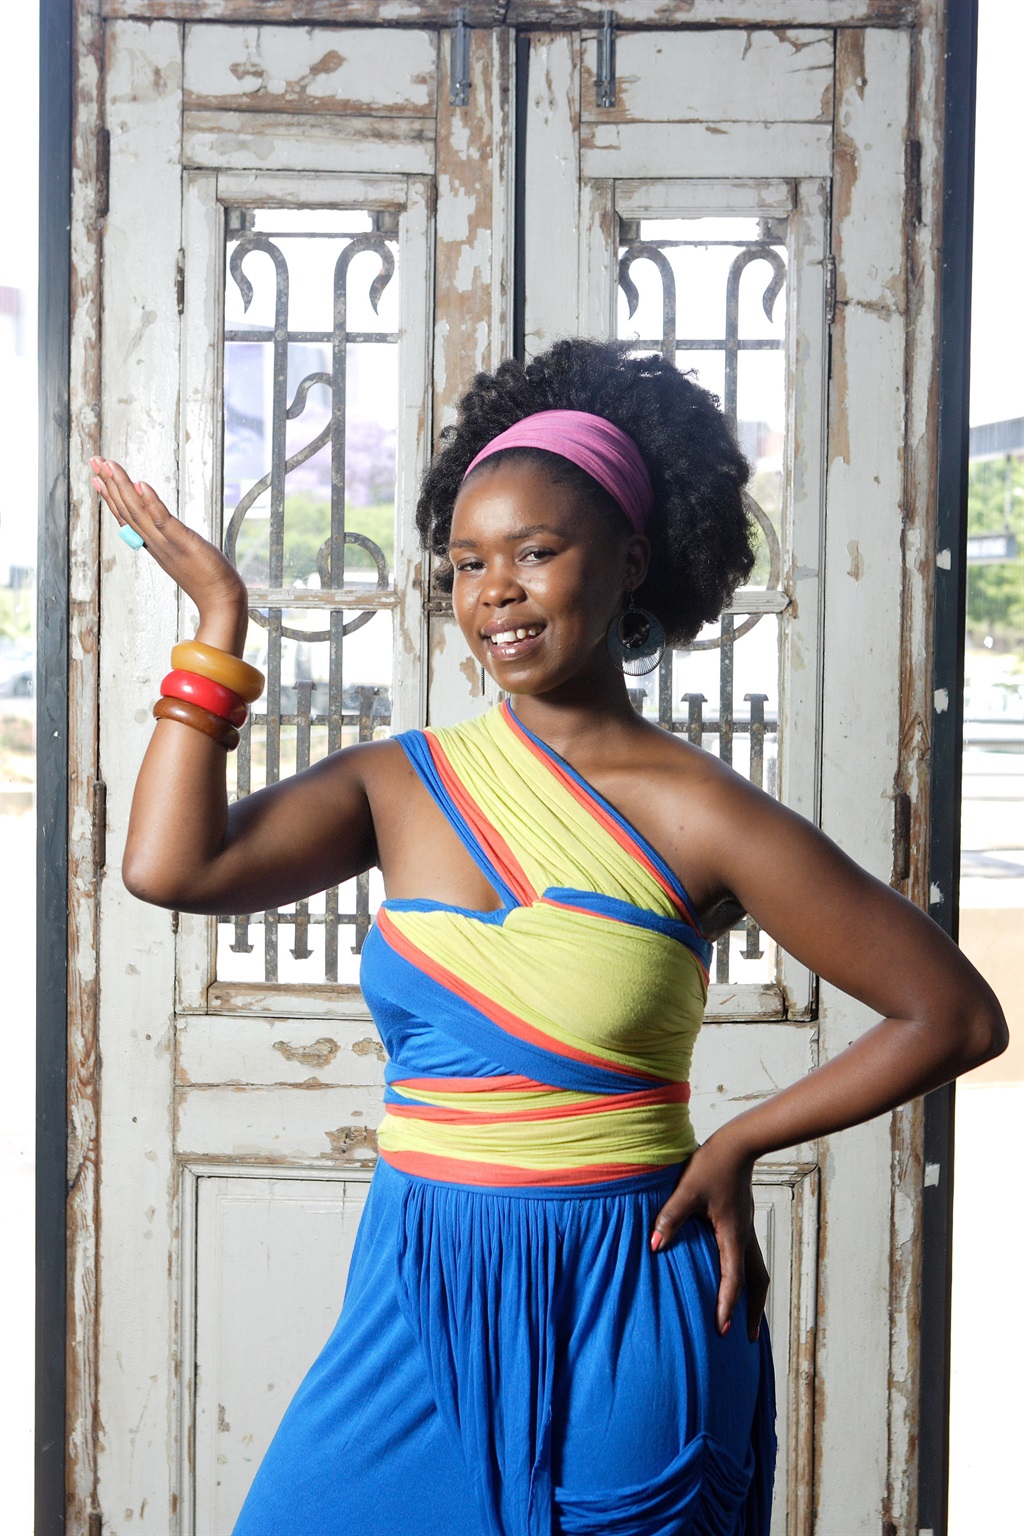 EXCLUSIVE: The rise and fall of Zahara